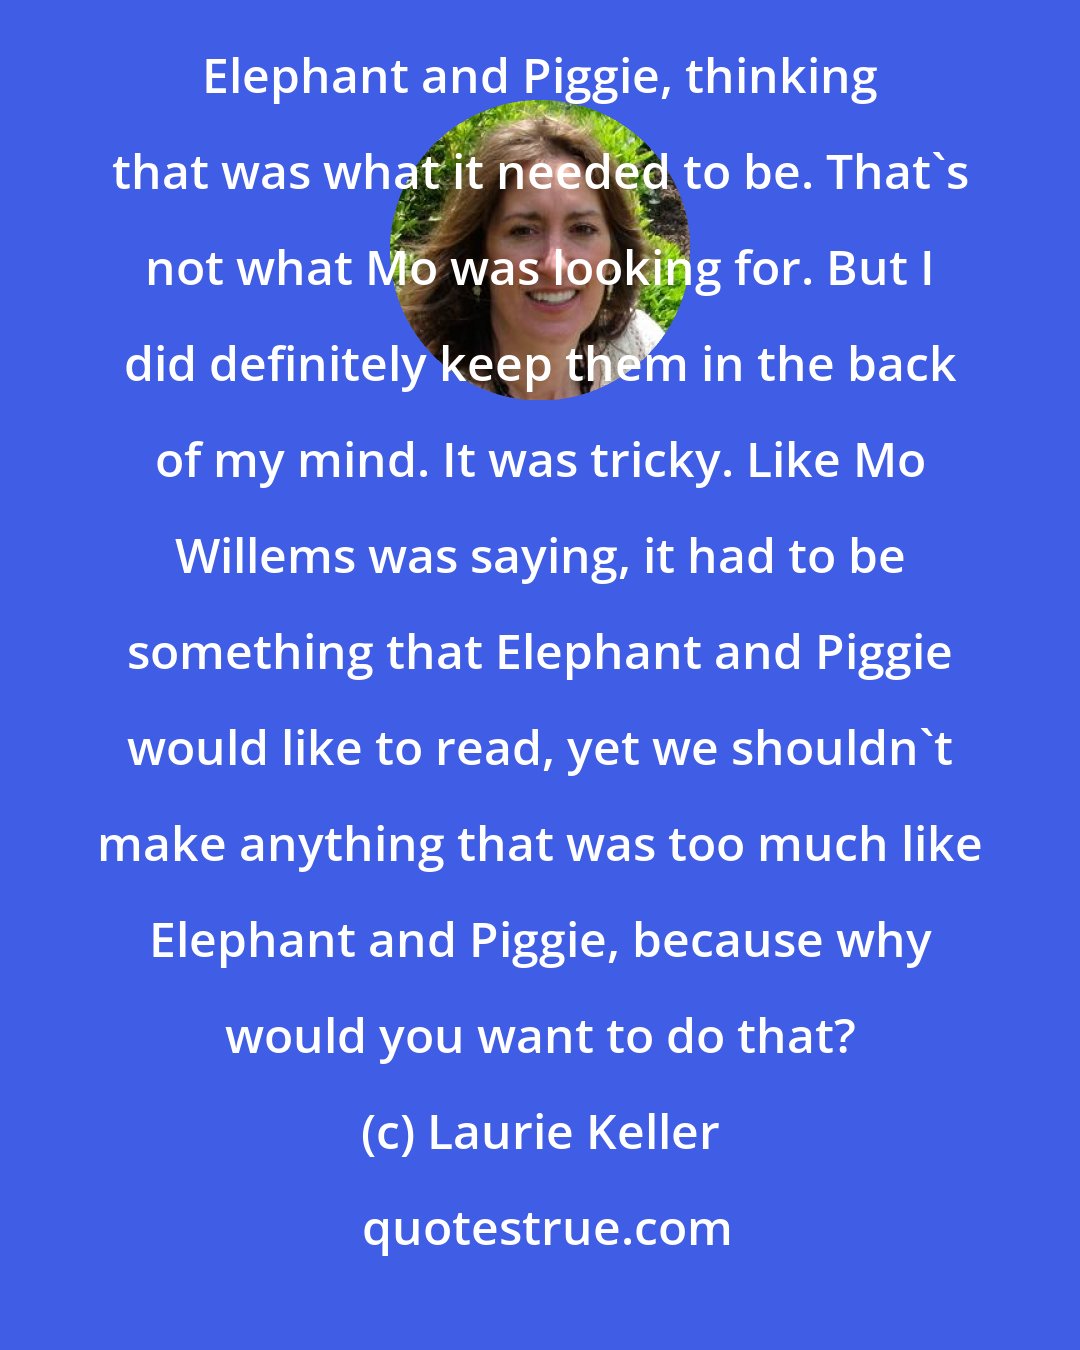 Laurie Keller: I had to be careful. A mistake I made when I submitted ideas initially was that one of them was too much like Elephant and Piggie, thinking that was what it needed to be. That's not what Mo was looking for. But I did definitely keep them in the back of my mind. It was tricky. Like Mo Willems was saying, it had to be something that Elephant and Piggie would like to read, yet we shouldn't make anything that was too much like Elephant and Piggie, because why would you want to do that?